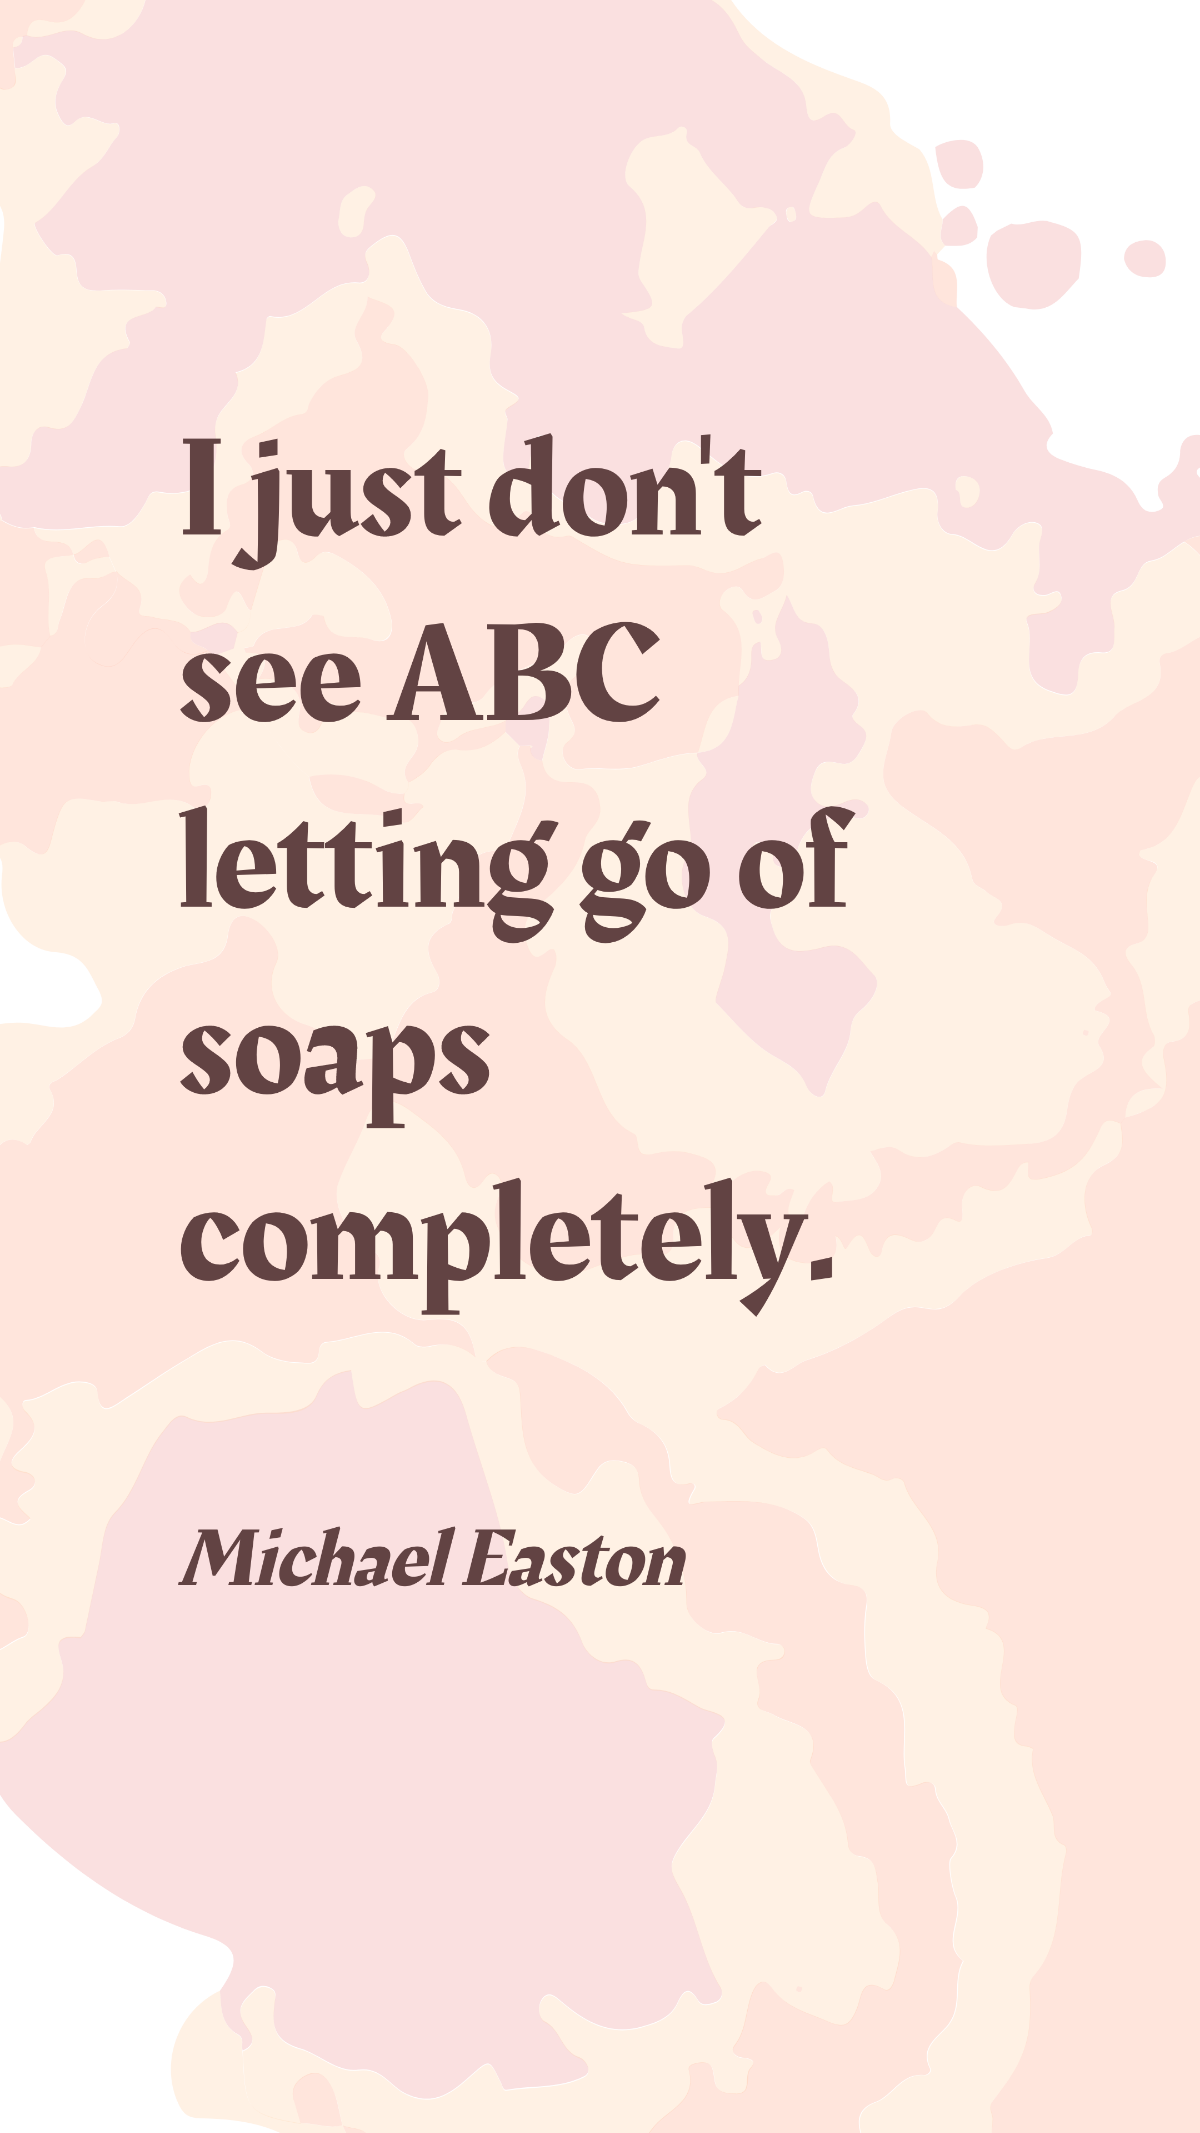 Free Michael Easton - I just don't see ABC letting go of soaps completely. Template